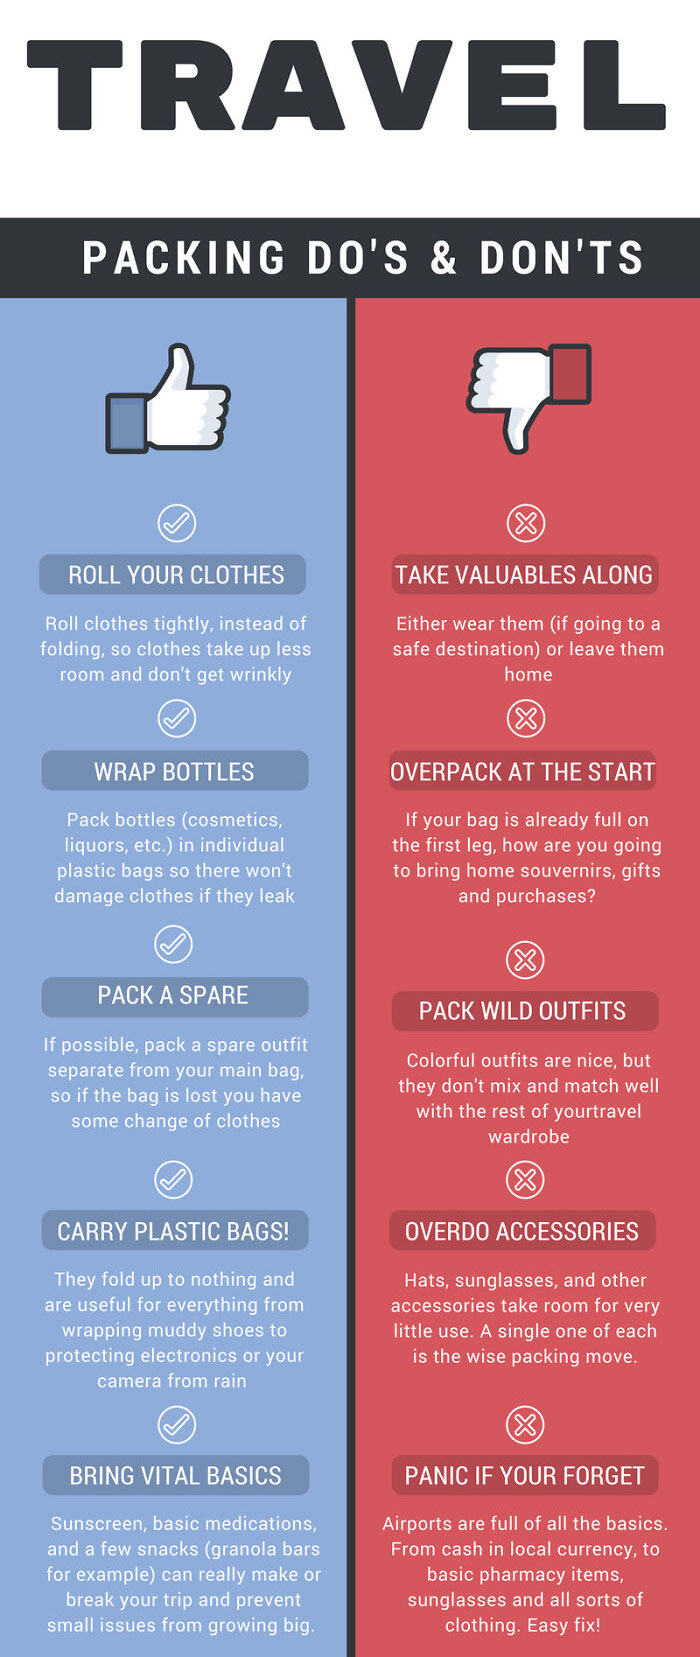 Travel Packing Do's And Don'ts